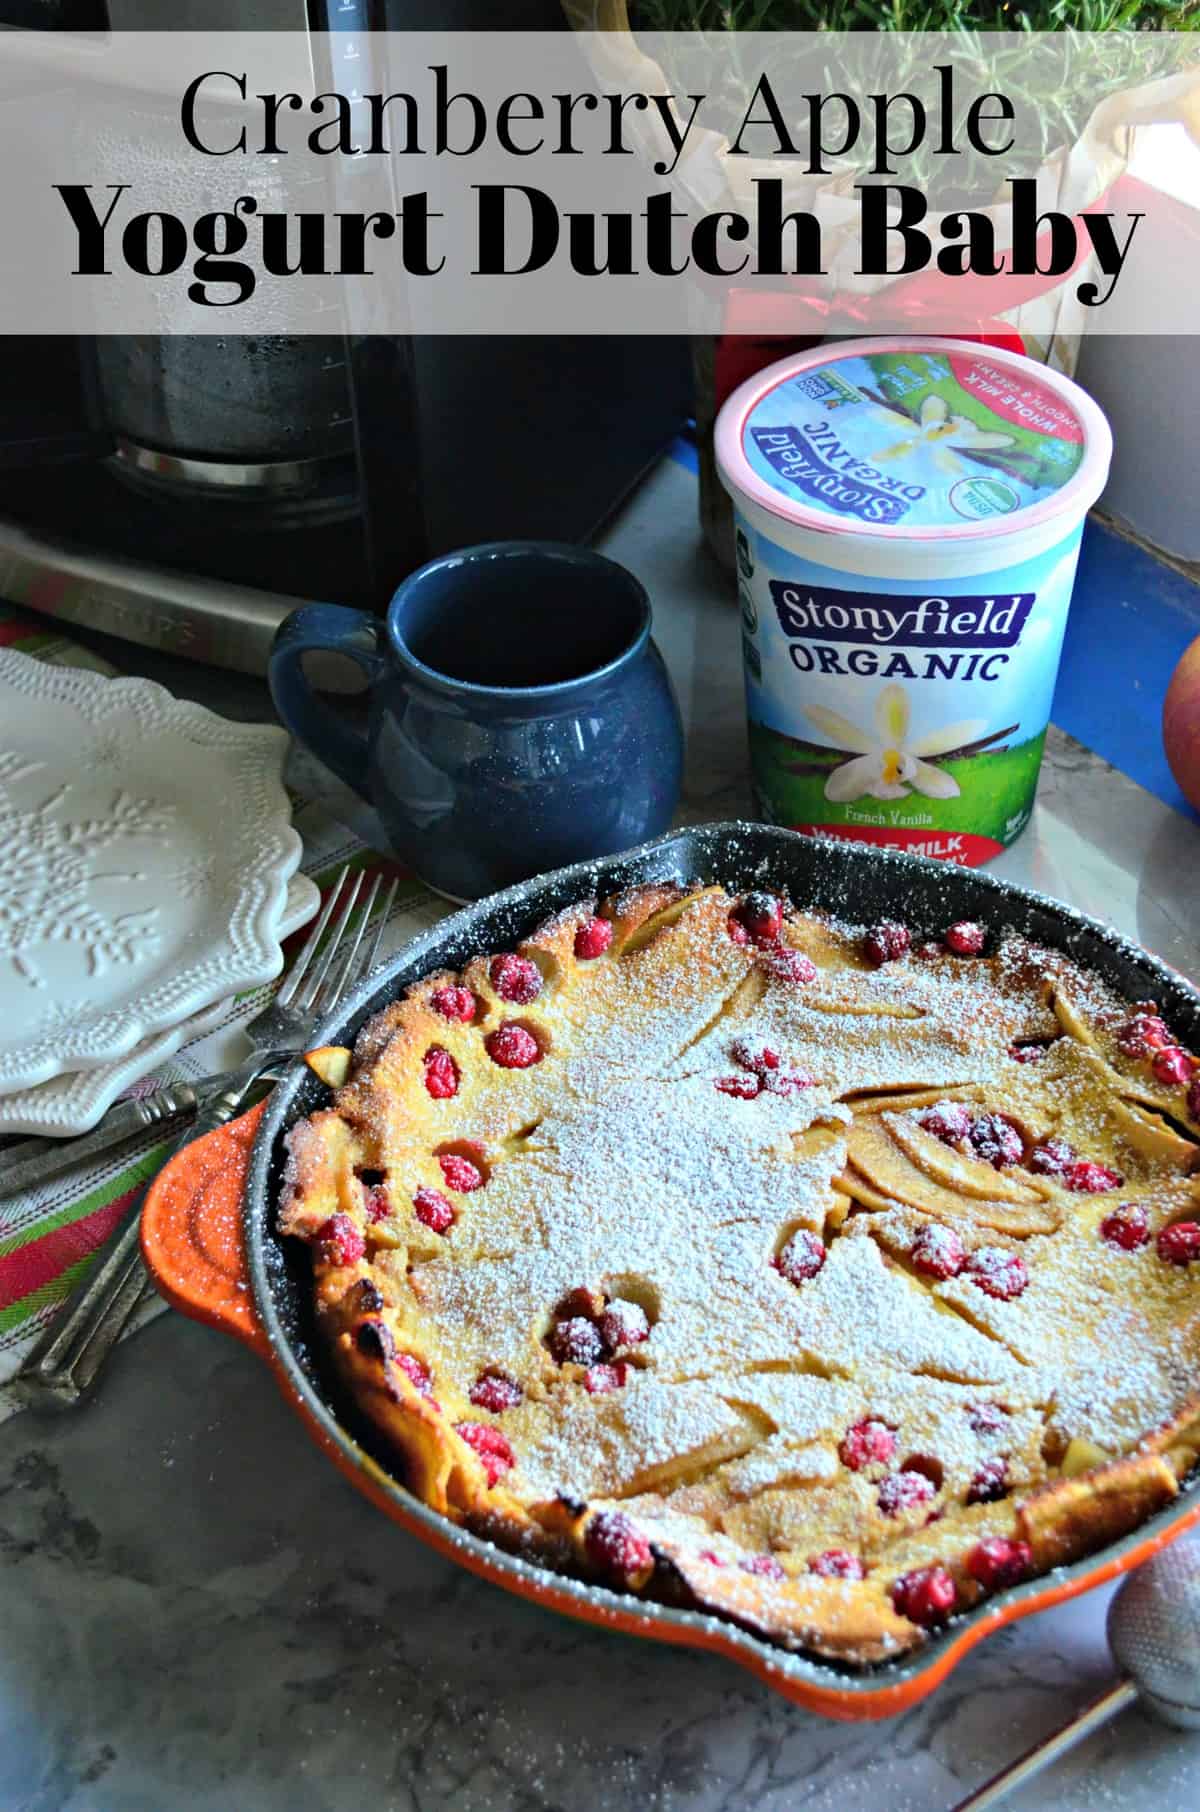 pancake like pastry with apples and cranberries baked into it in skillet topped with powdered sugar.